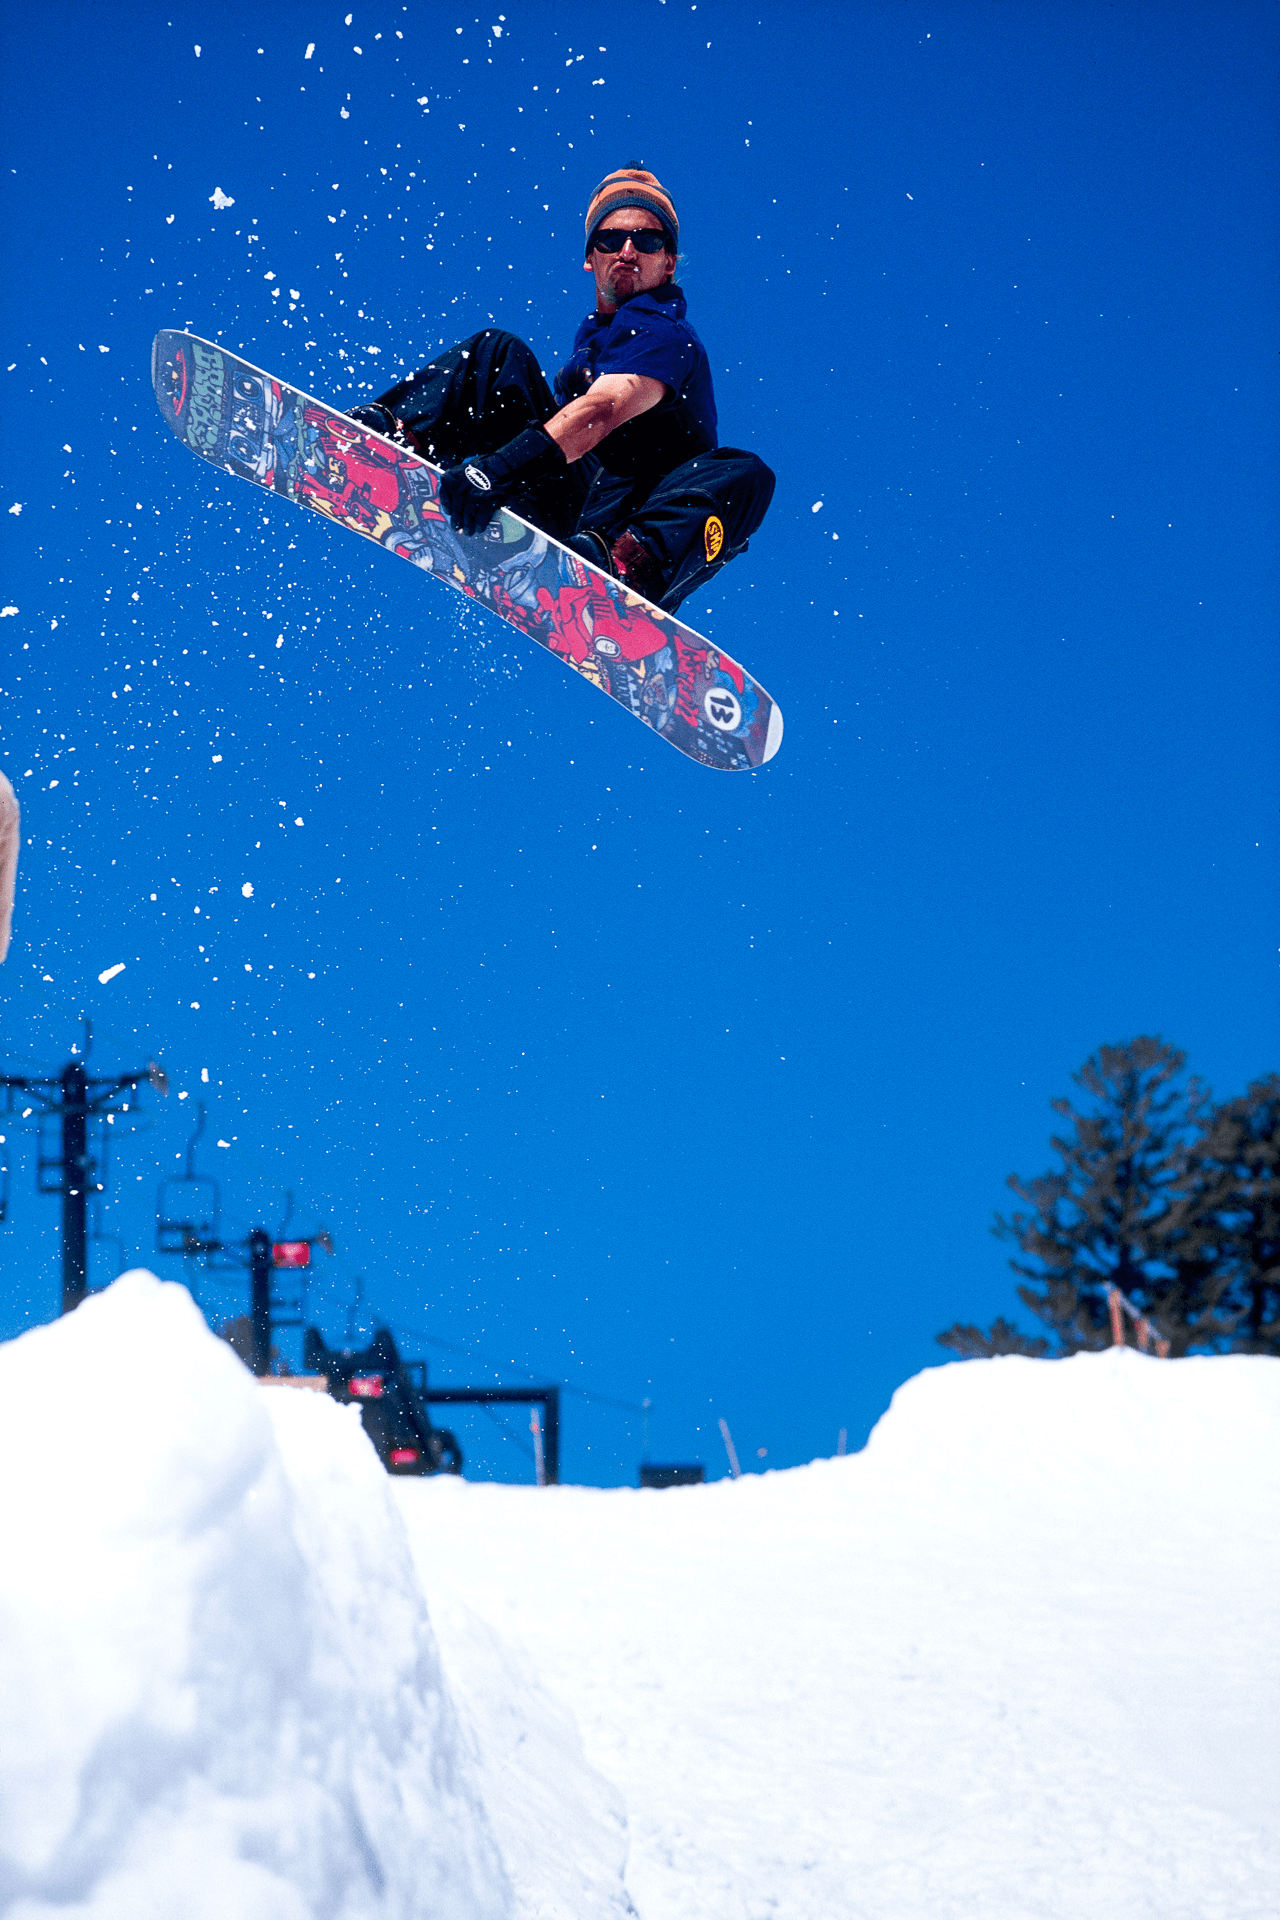 Jeff Brushie at Squaw Valley, 1993.